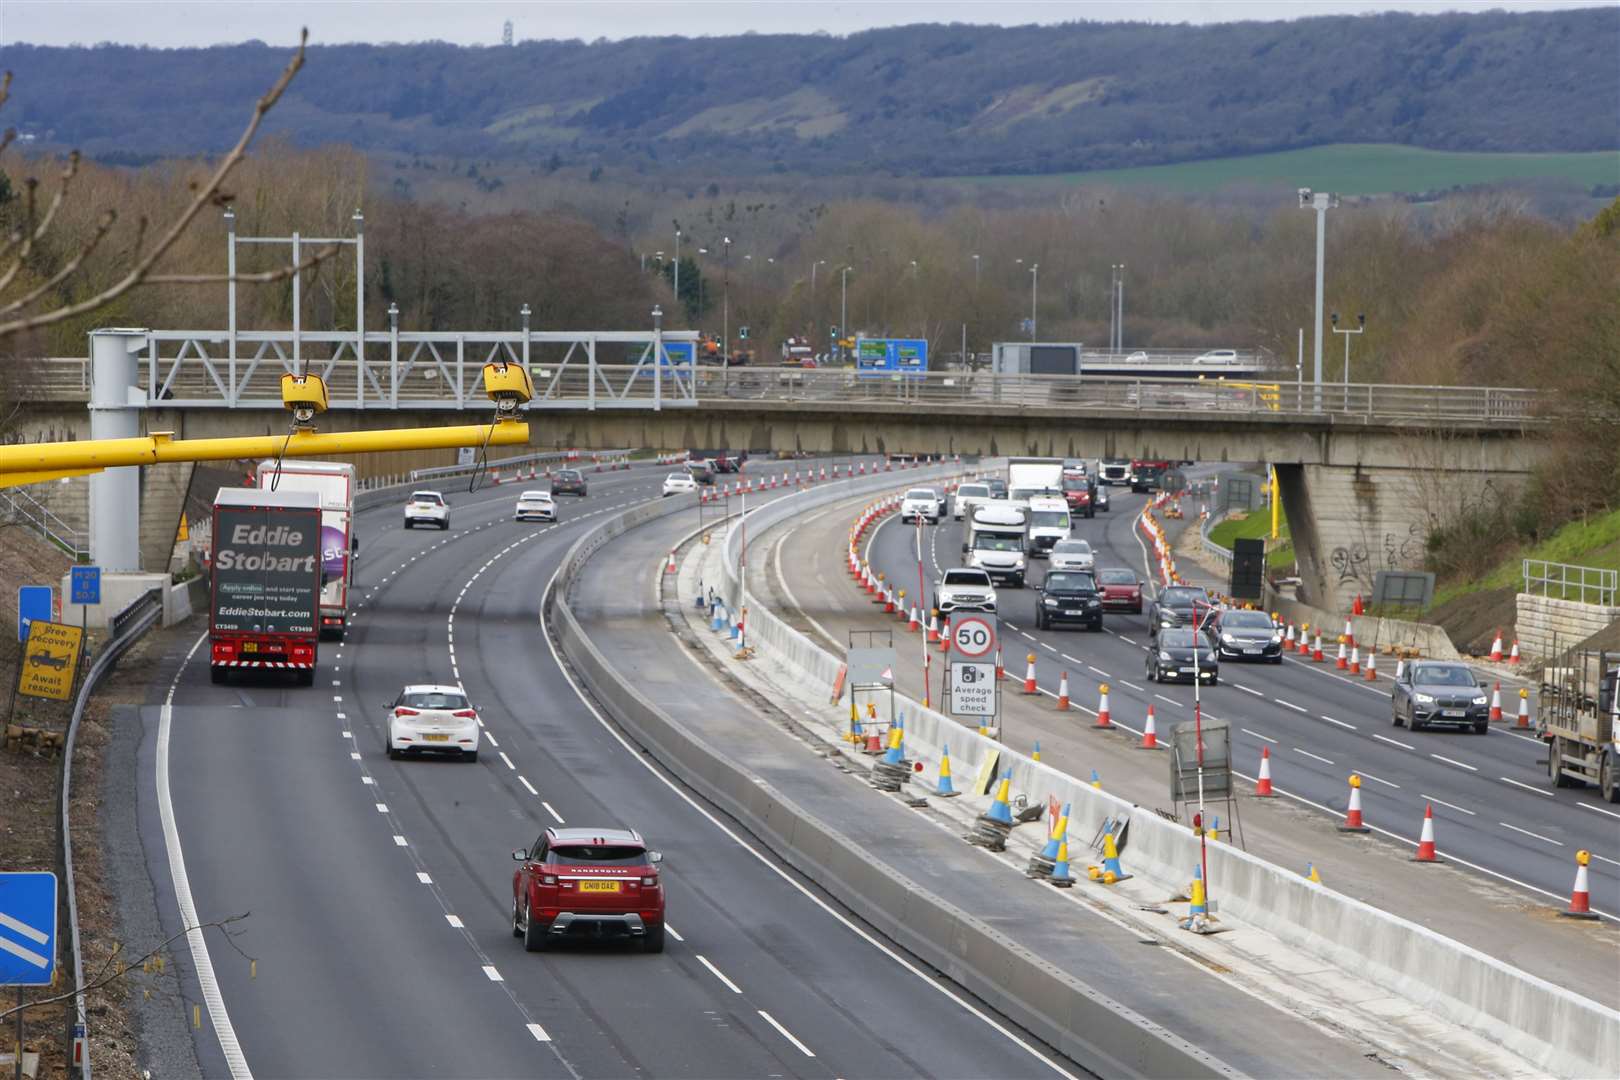 Work gets underway on the smart motorway, between junctions 5 & 4 on the M20, which is now completed